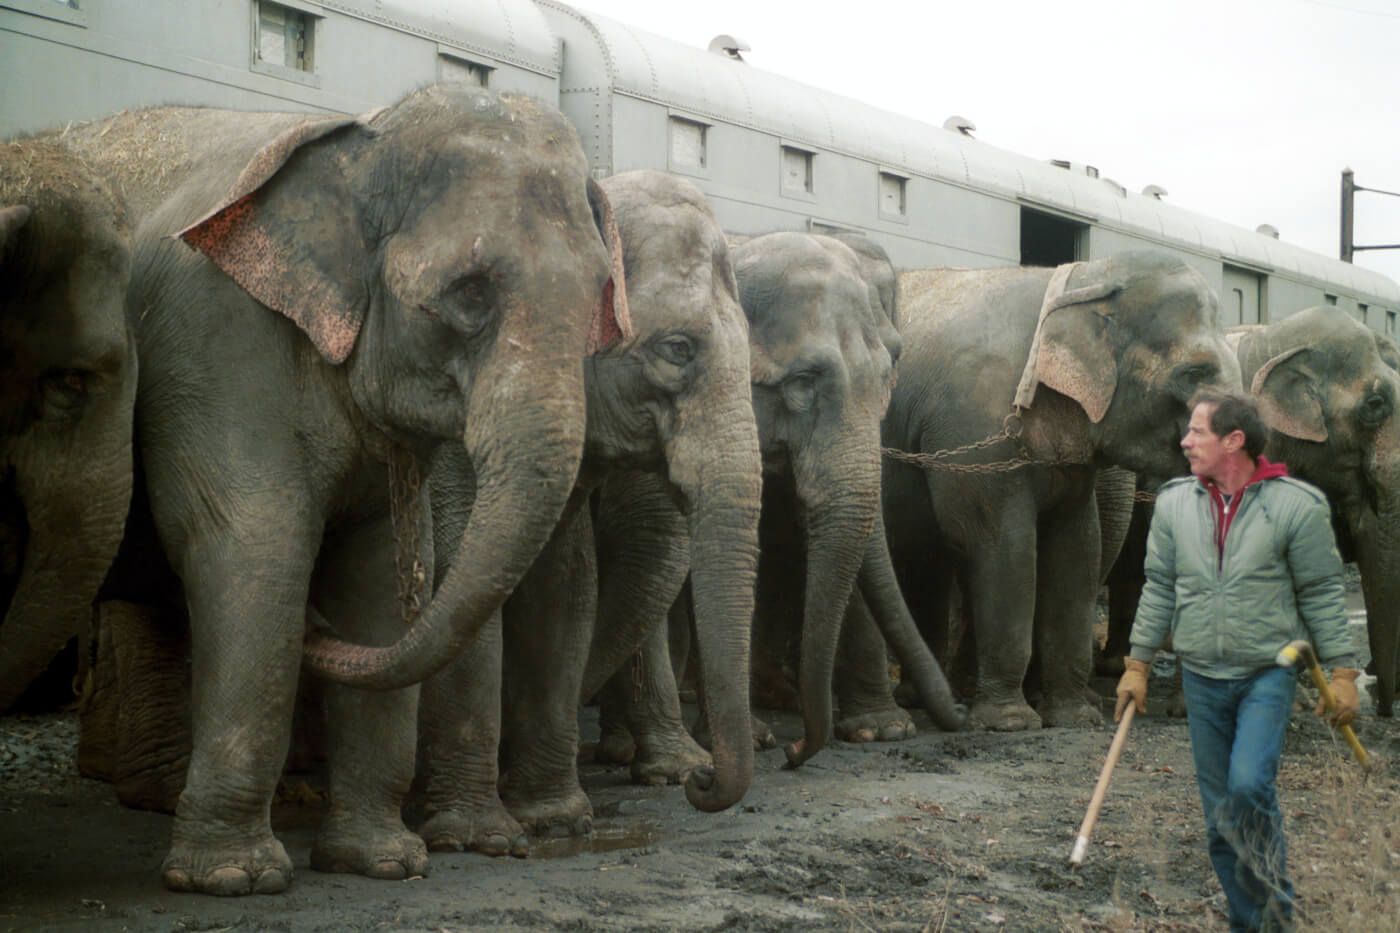 elephants in line by boxcars at circus